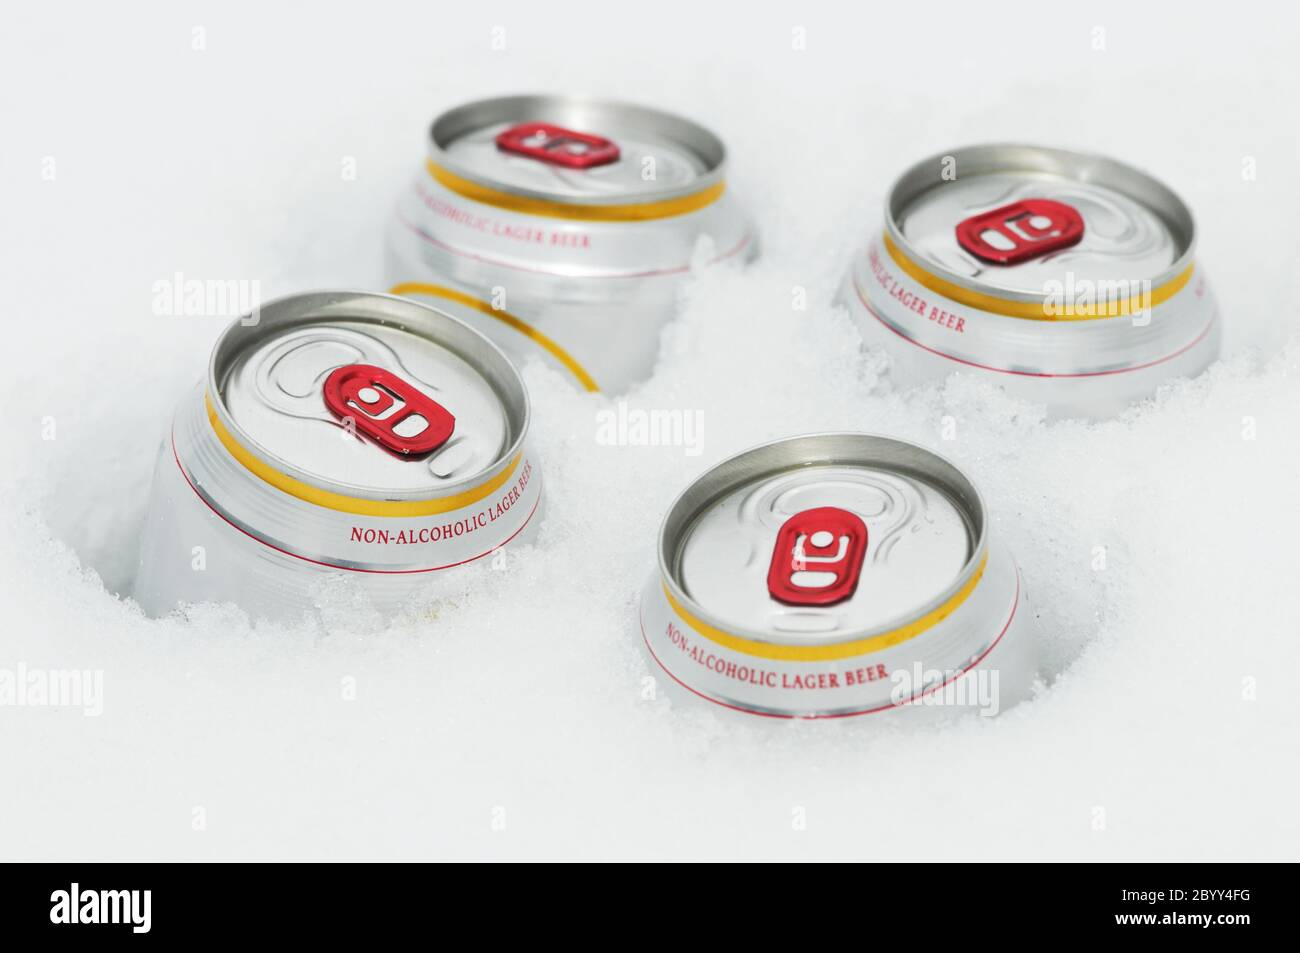 beer cans in winter snow Stock Photo